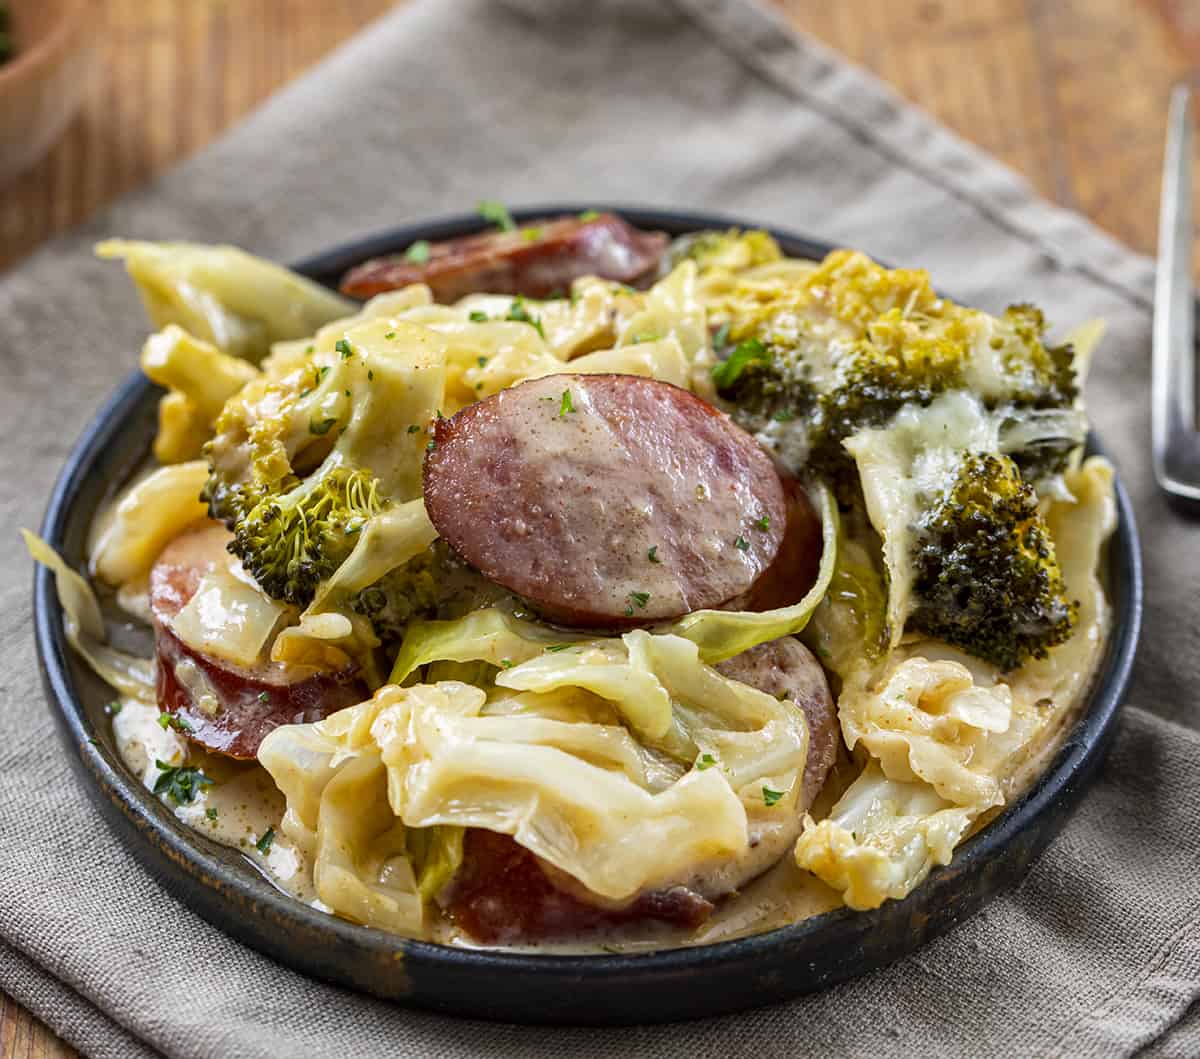 Plate of Cheesy Sausage Cabbage Broccoli Bake. Dinner, Cabbage Recipes, Fried Cabbage, Sausage and Cabbage, Polish Sausage Recipes, Summer Sausage Recipes, Kielbasa Recipes, i am homesteader, iamhomesteader